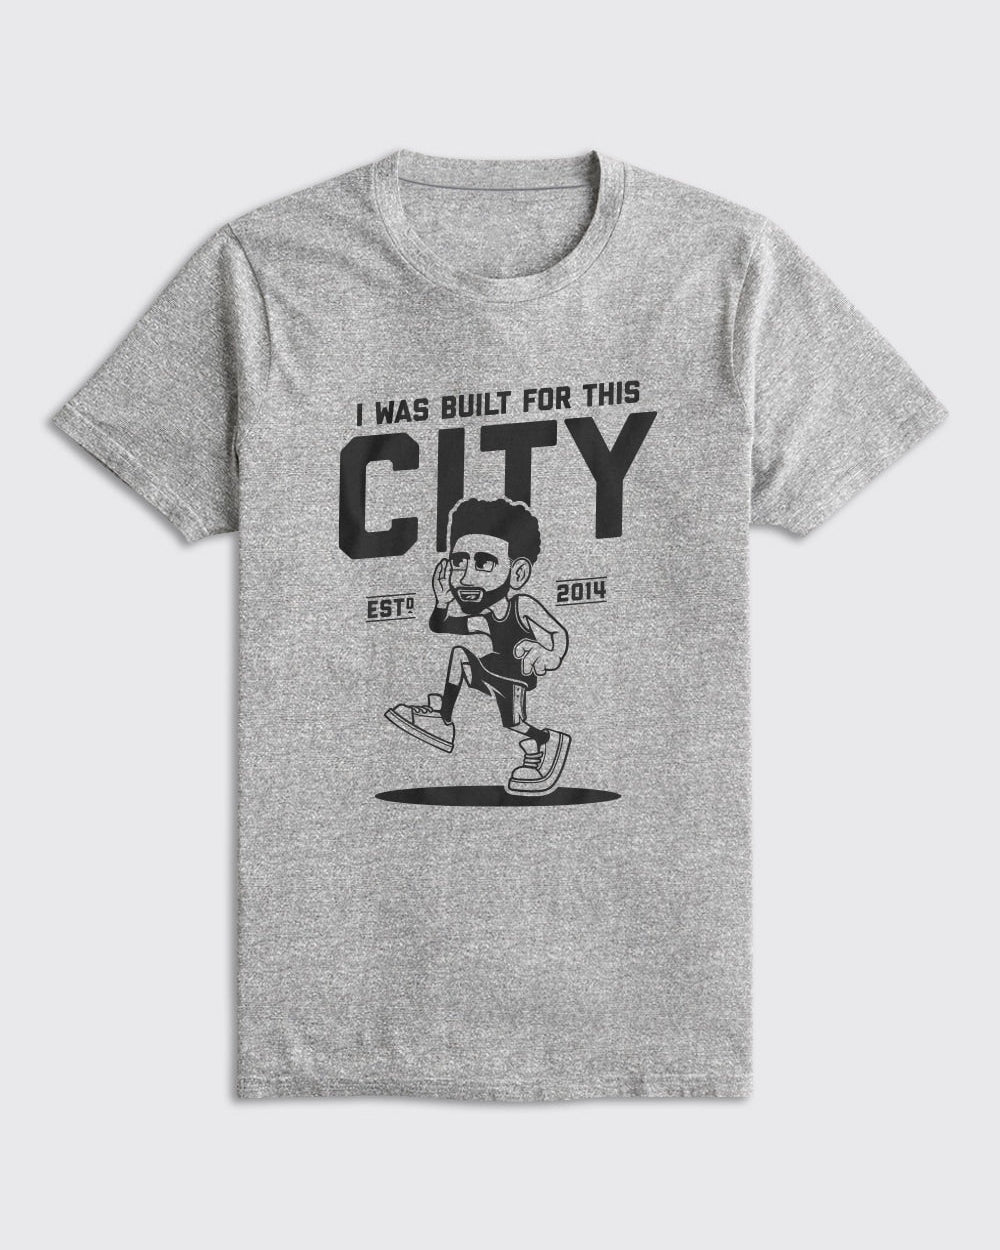 Built For This City Shirt-Philly Sports Shirts